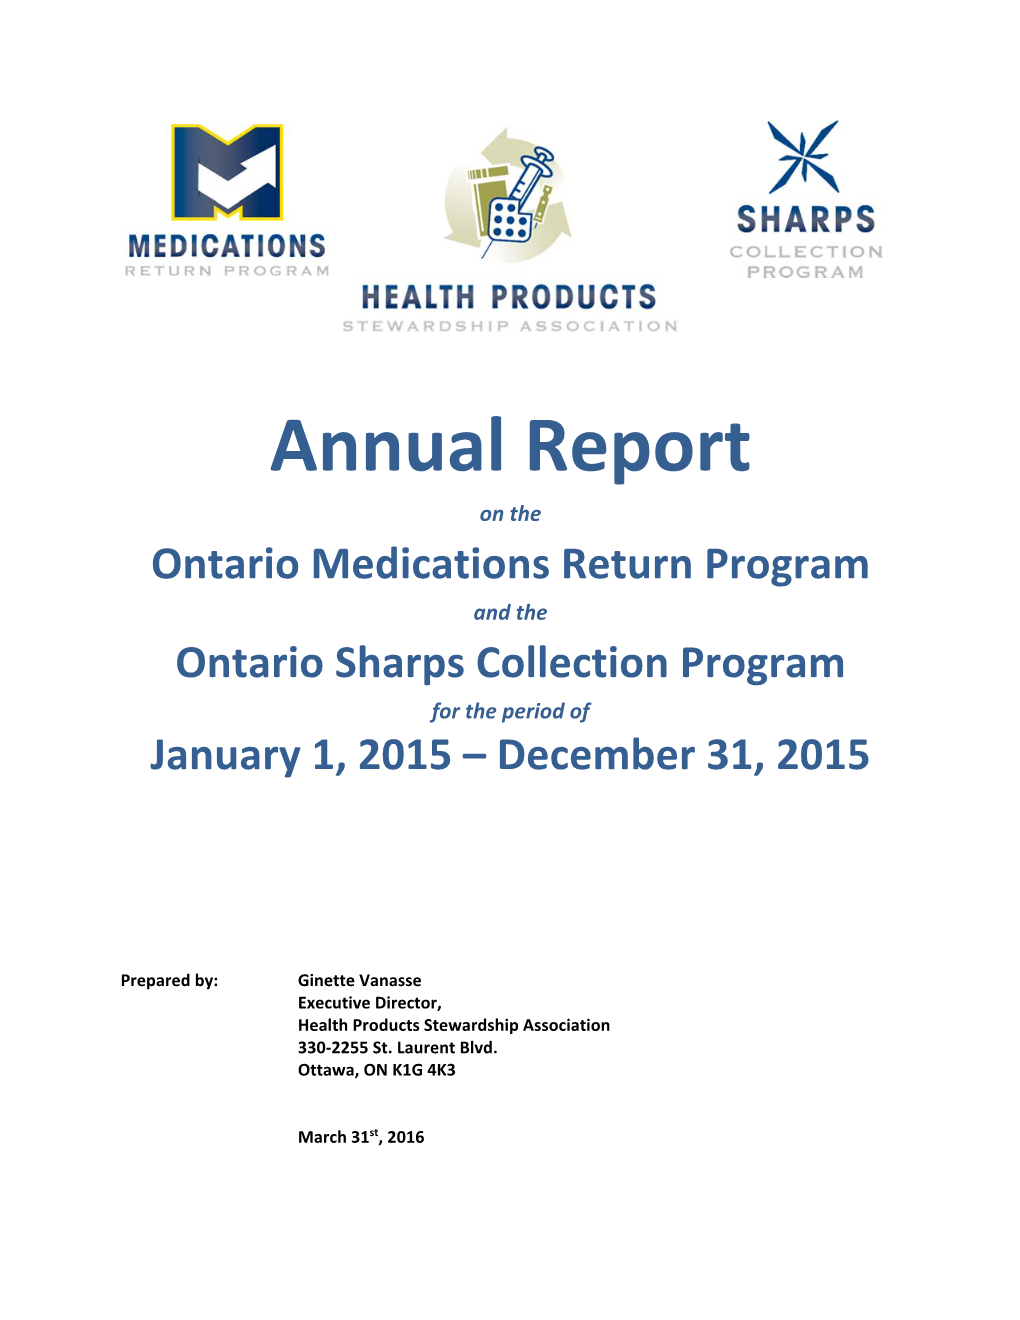 Annual Report on the Ontario Medications Return Program and the Ontario Sharps Collection Program for the Period of January 1, 2015 – December 31, 2015